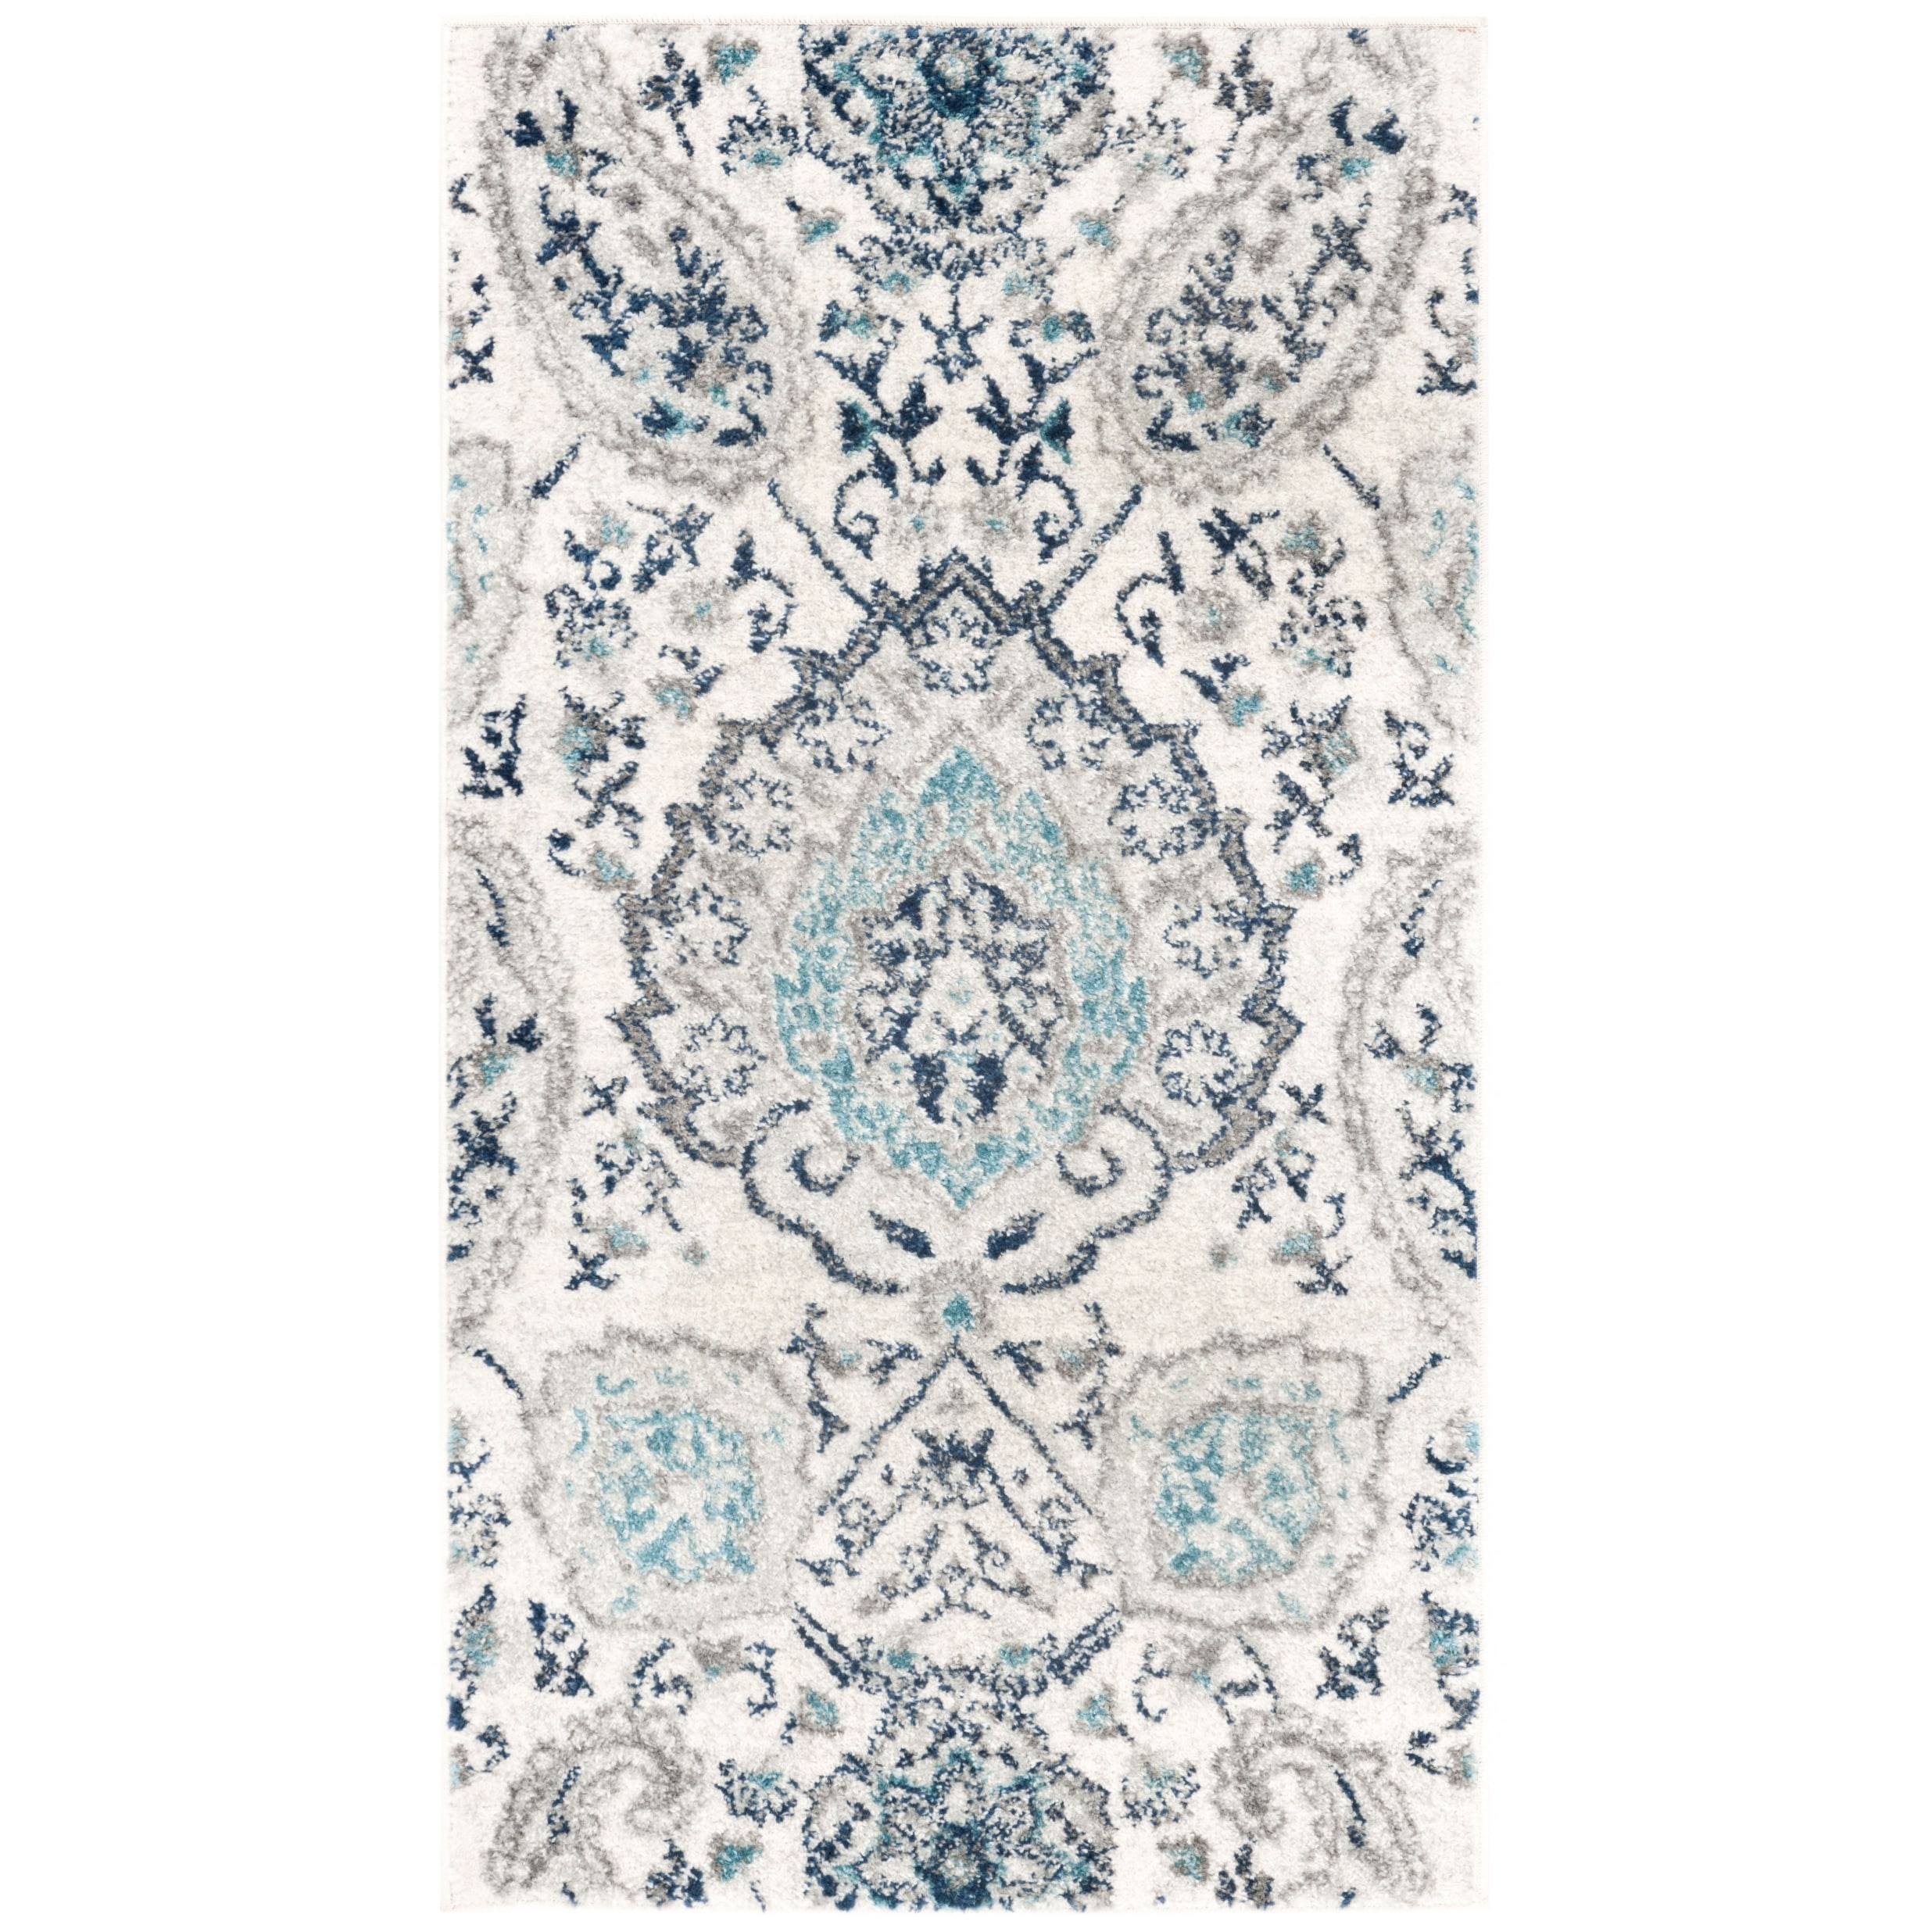 Silver 2'3 x 8' SAFAVIEH Madison Collection MAD600D Boho Chic Glam Paisley Non-Shedding Living Room Entryway Foyer Hallway Bedroom Runner Cream 